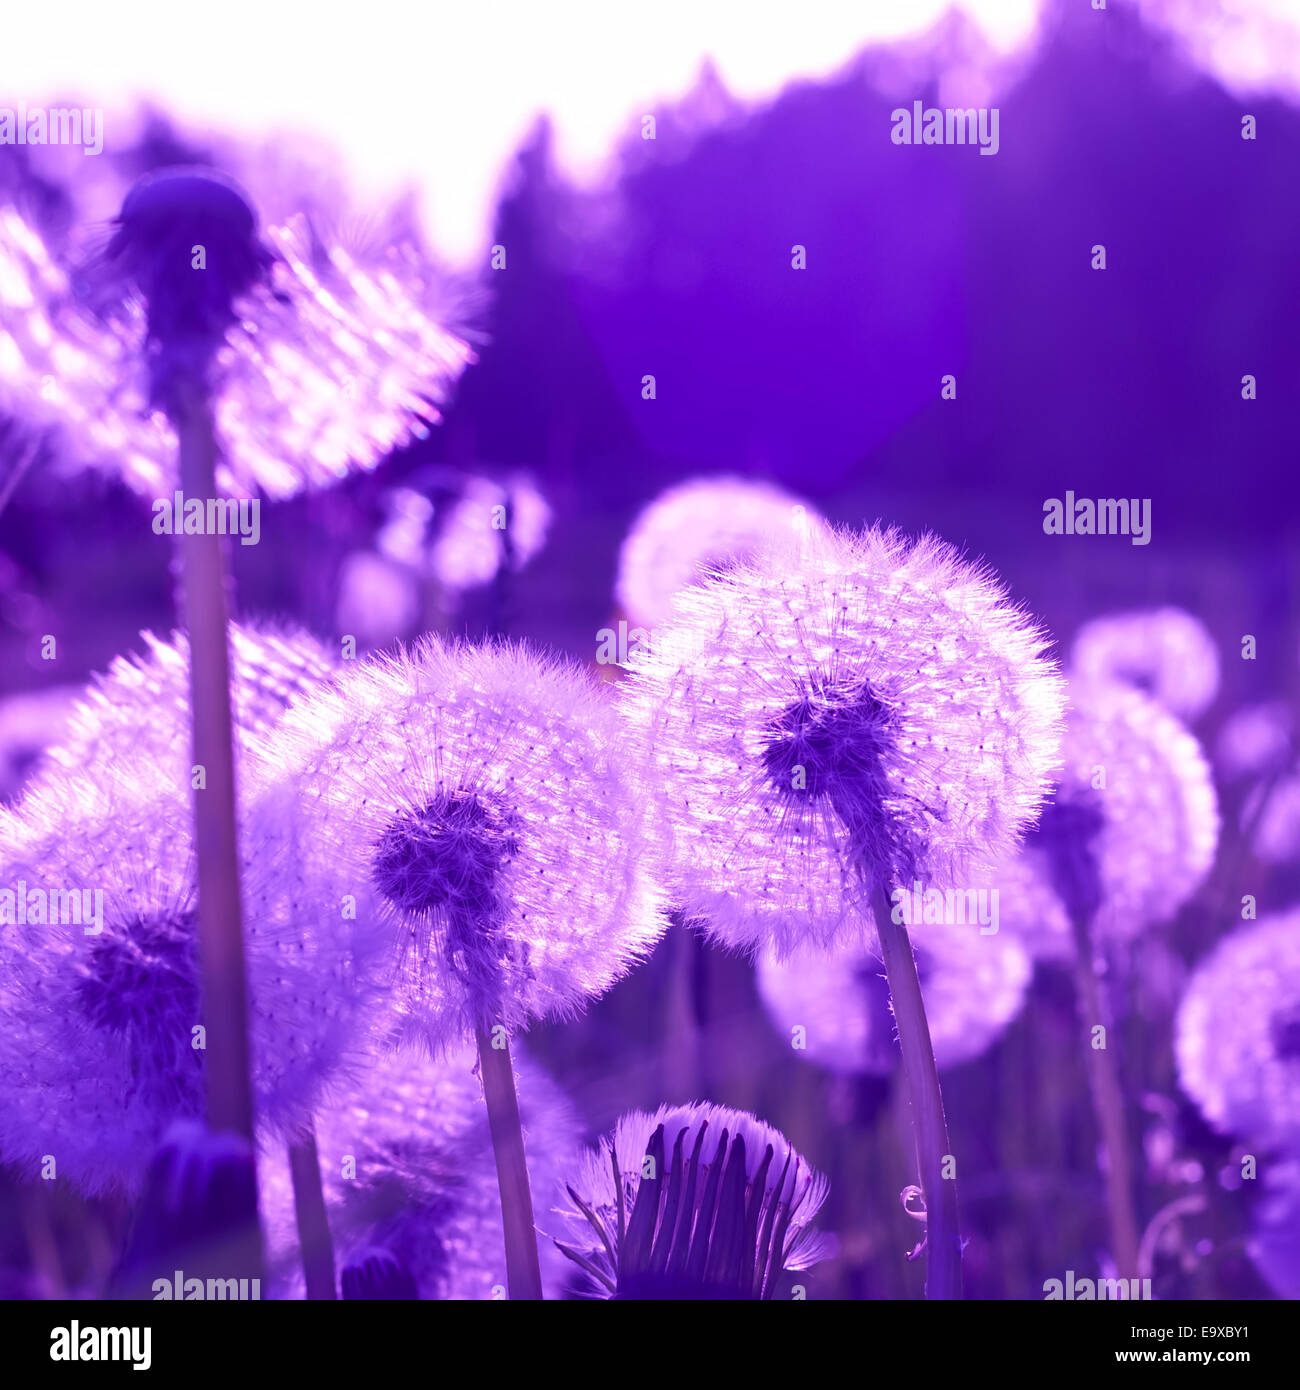 Dandelion fantasy. Tinted by mauve color Stock Photo